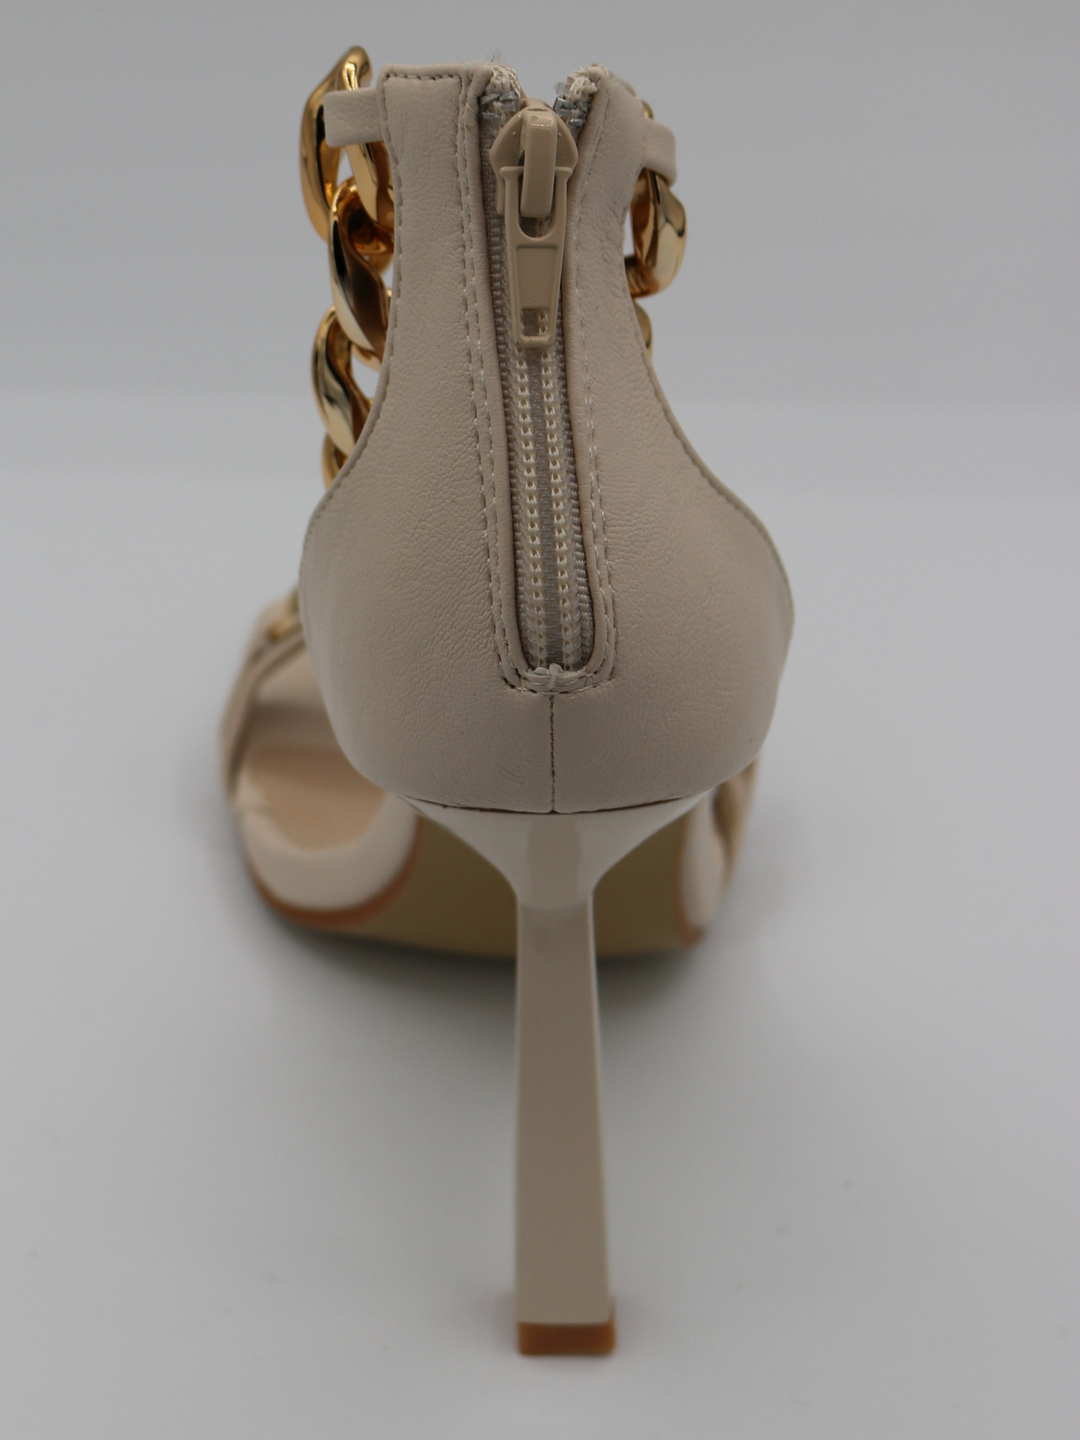 A cream shoe with gold detail at the base strap as well as gold chain detailing at the ankle. The photograph shows a close up of the back of the shoe, showing the cream heel and zip to the back of the shoe, that closes and secures the shoe. 